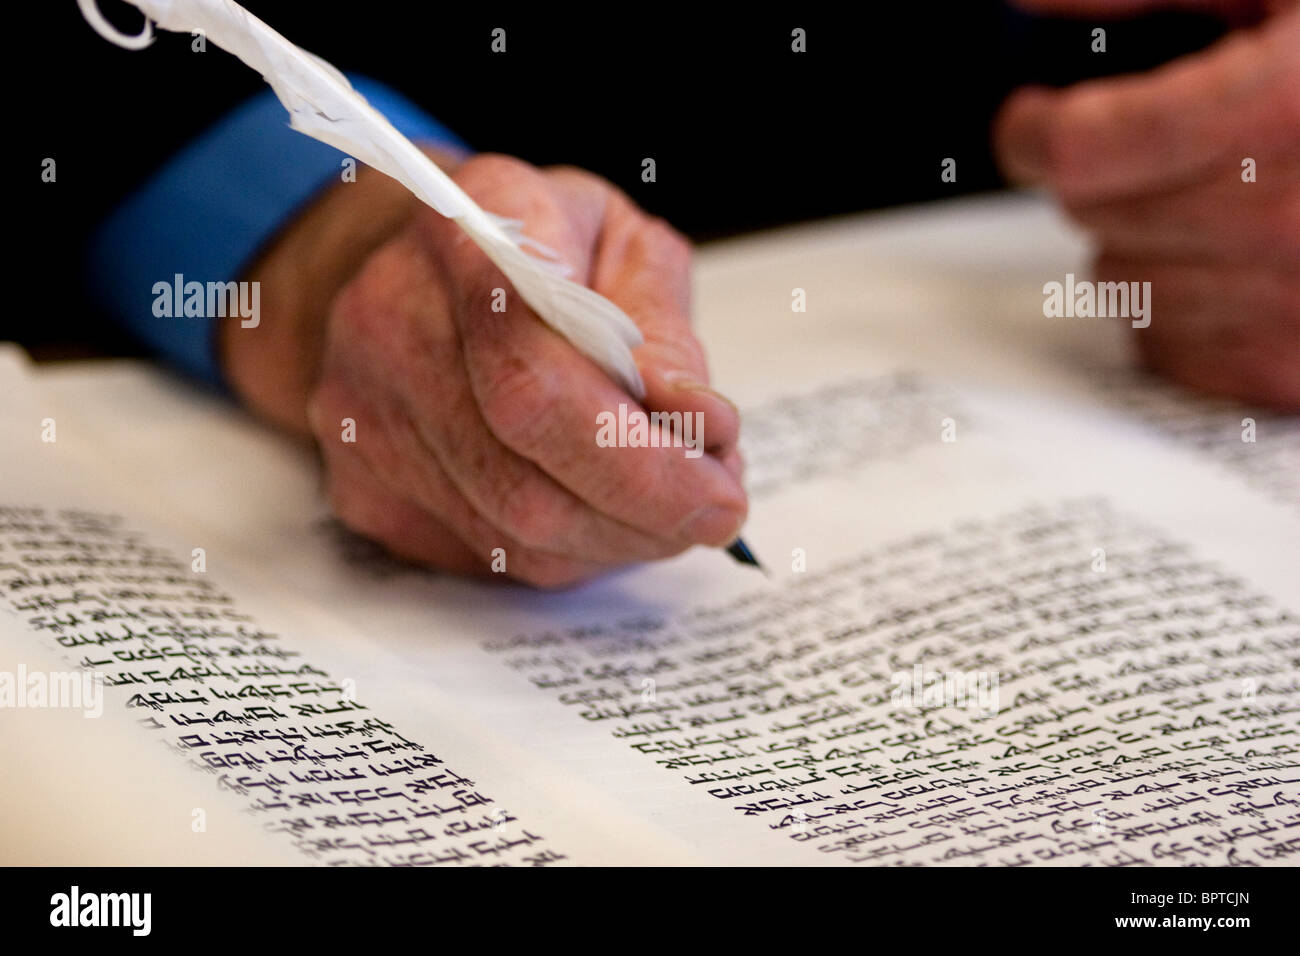 The duties of a Hebrew Scribe or Sofer